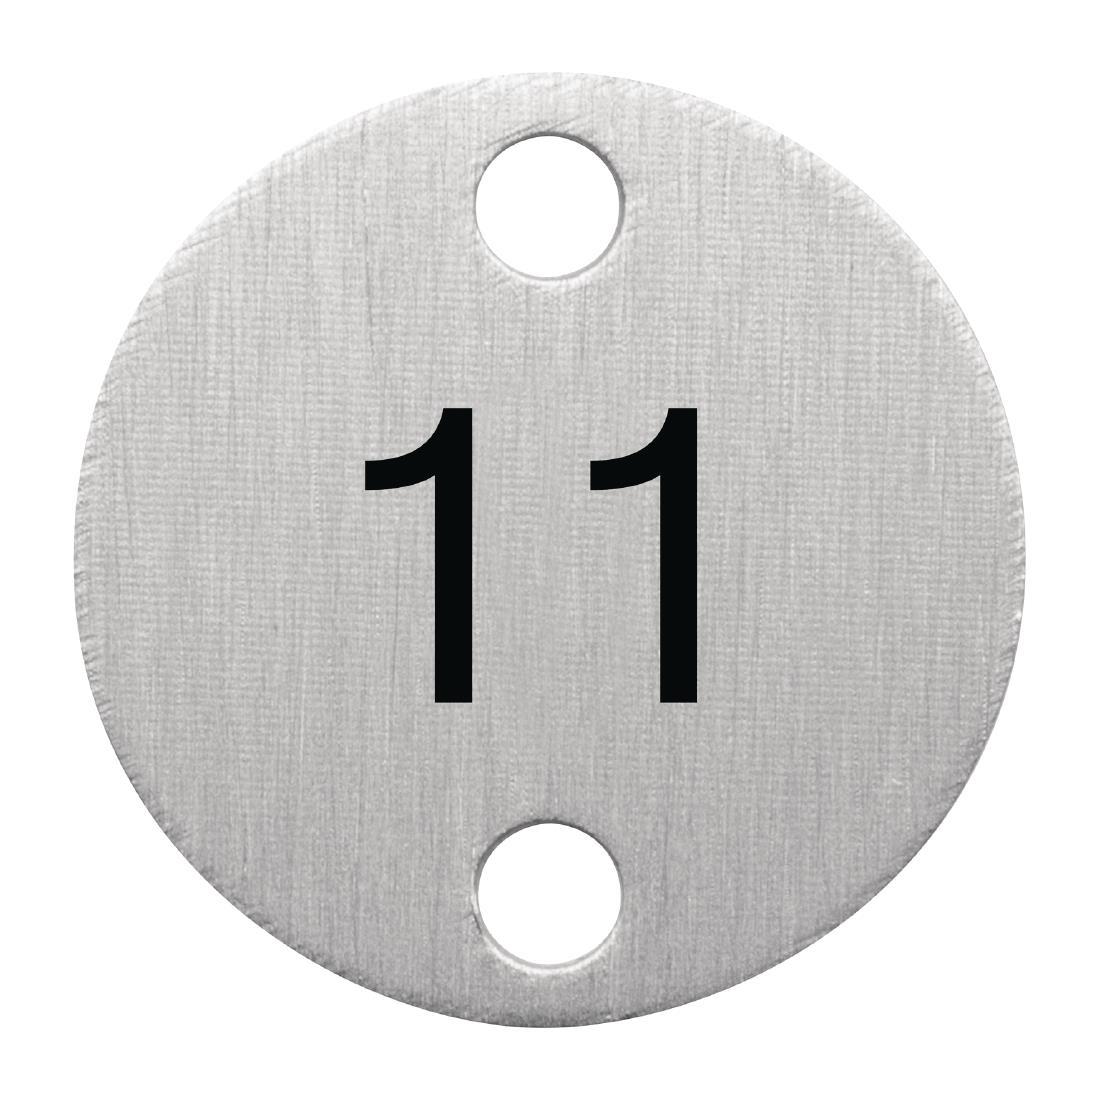 Bolero Table Numbers Silver (11-15) - DY772  - 1